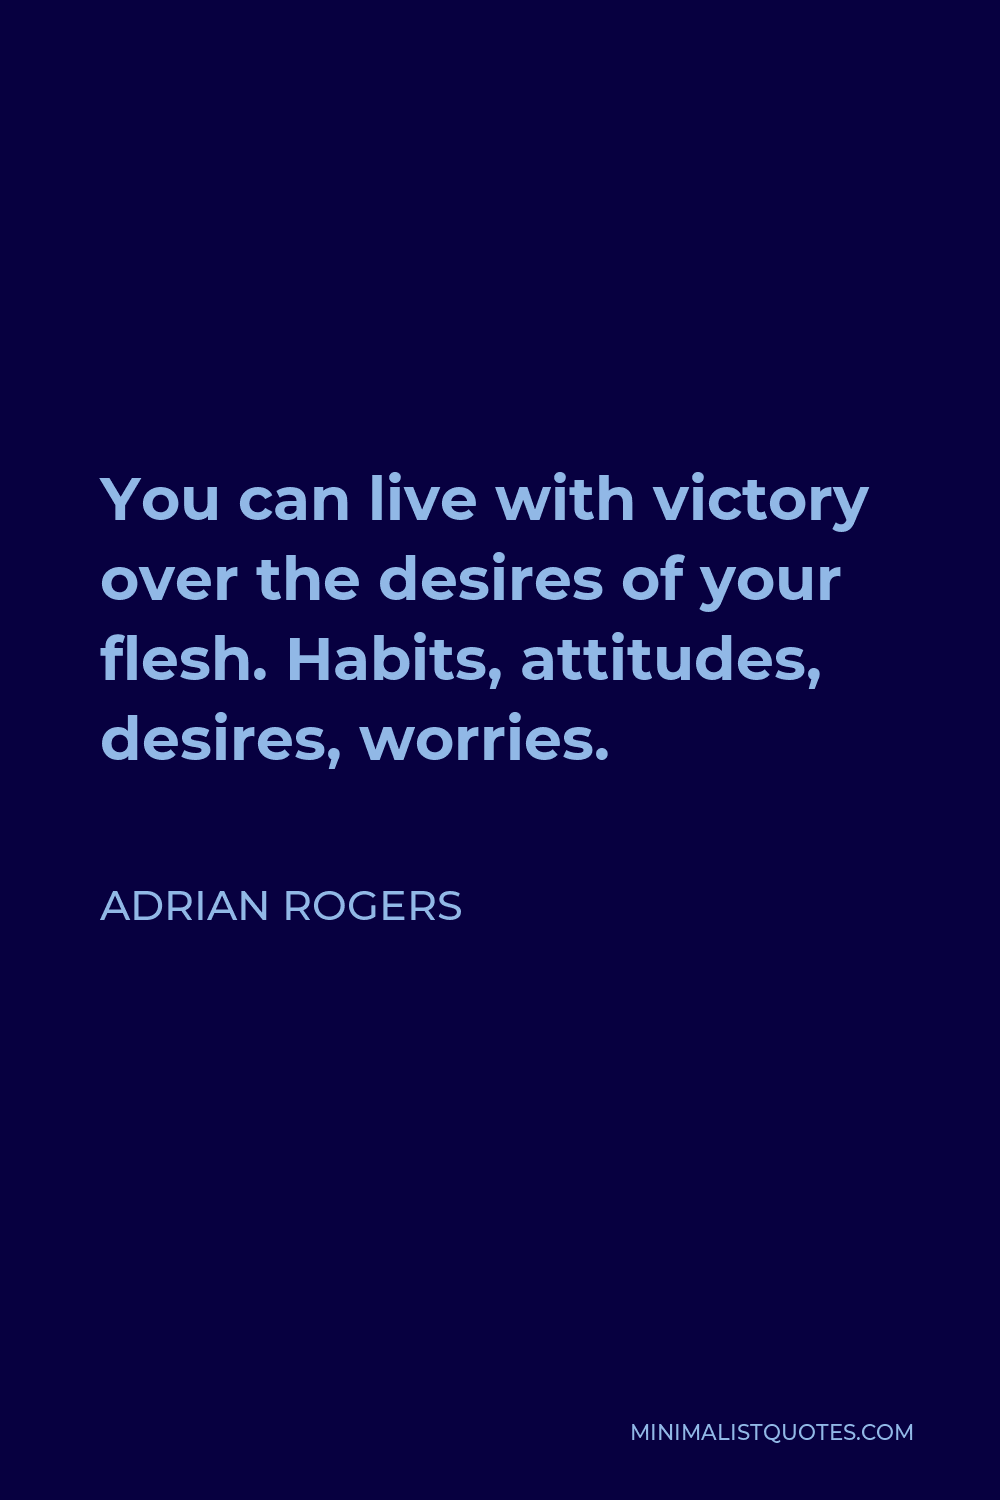 Adrian Rogers Quote - You can live with victory over the desires of your flesh. Habits, attitudes, desires, worries.